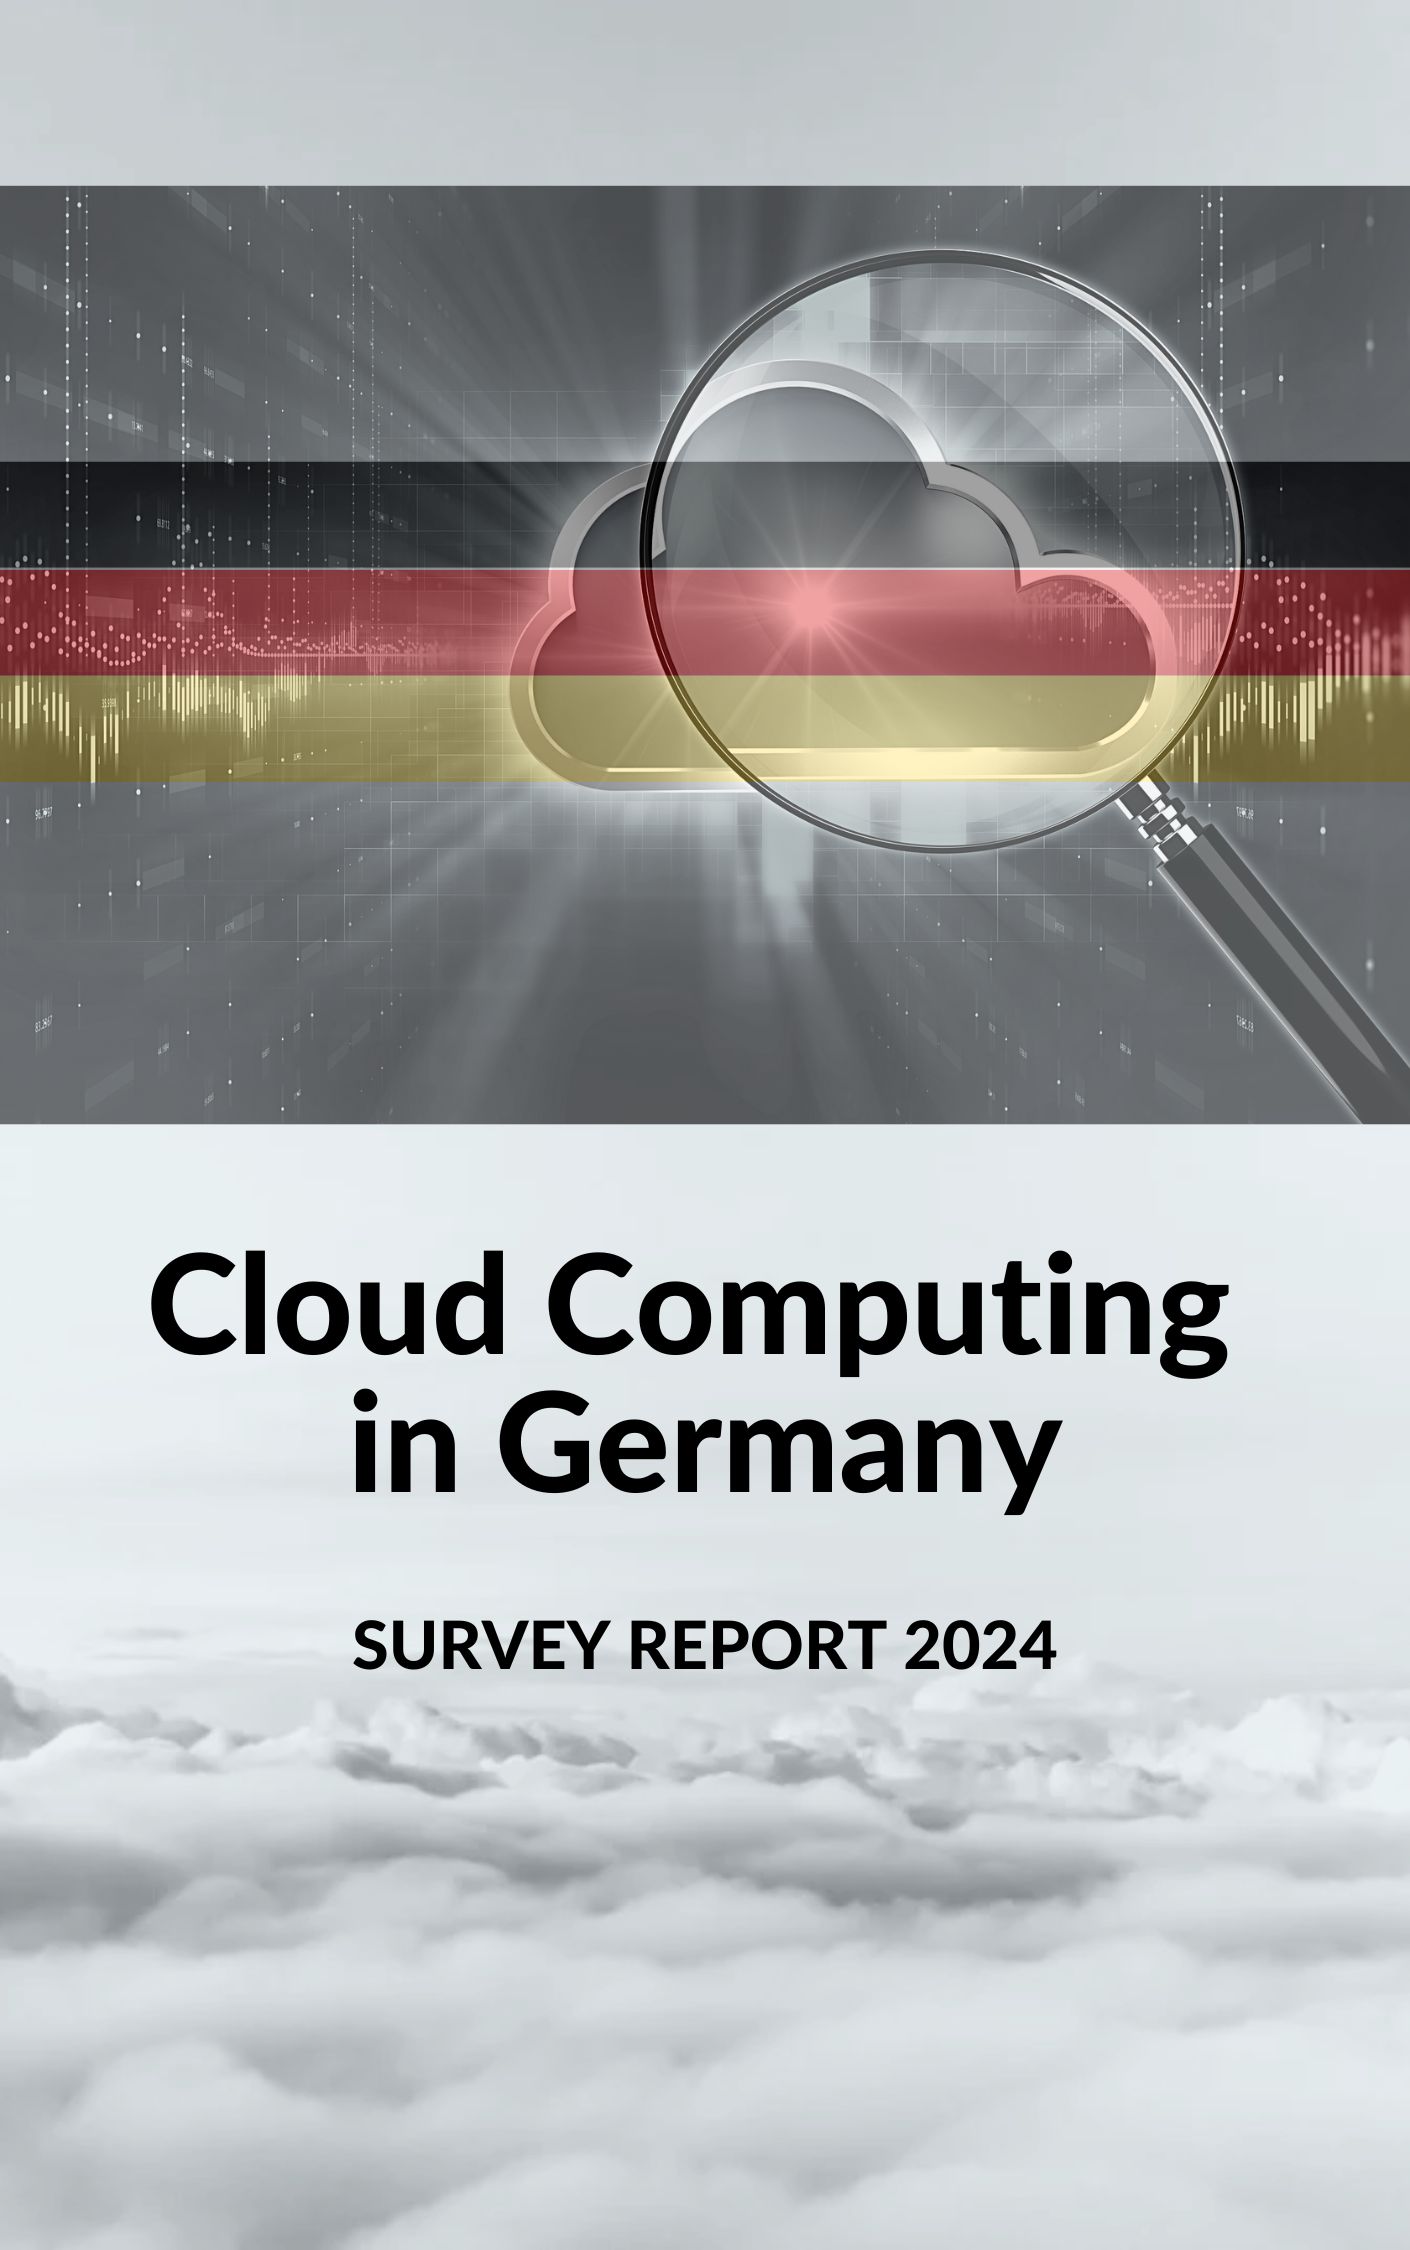 Cloud Computing in Germany Survey 2024: Results Available